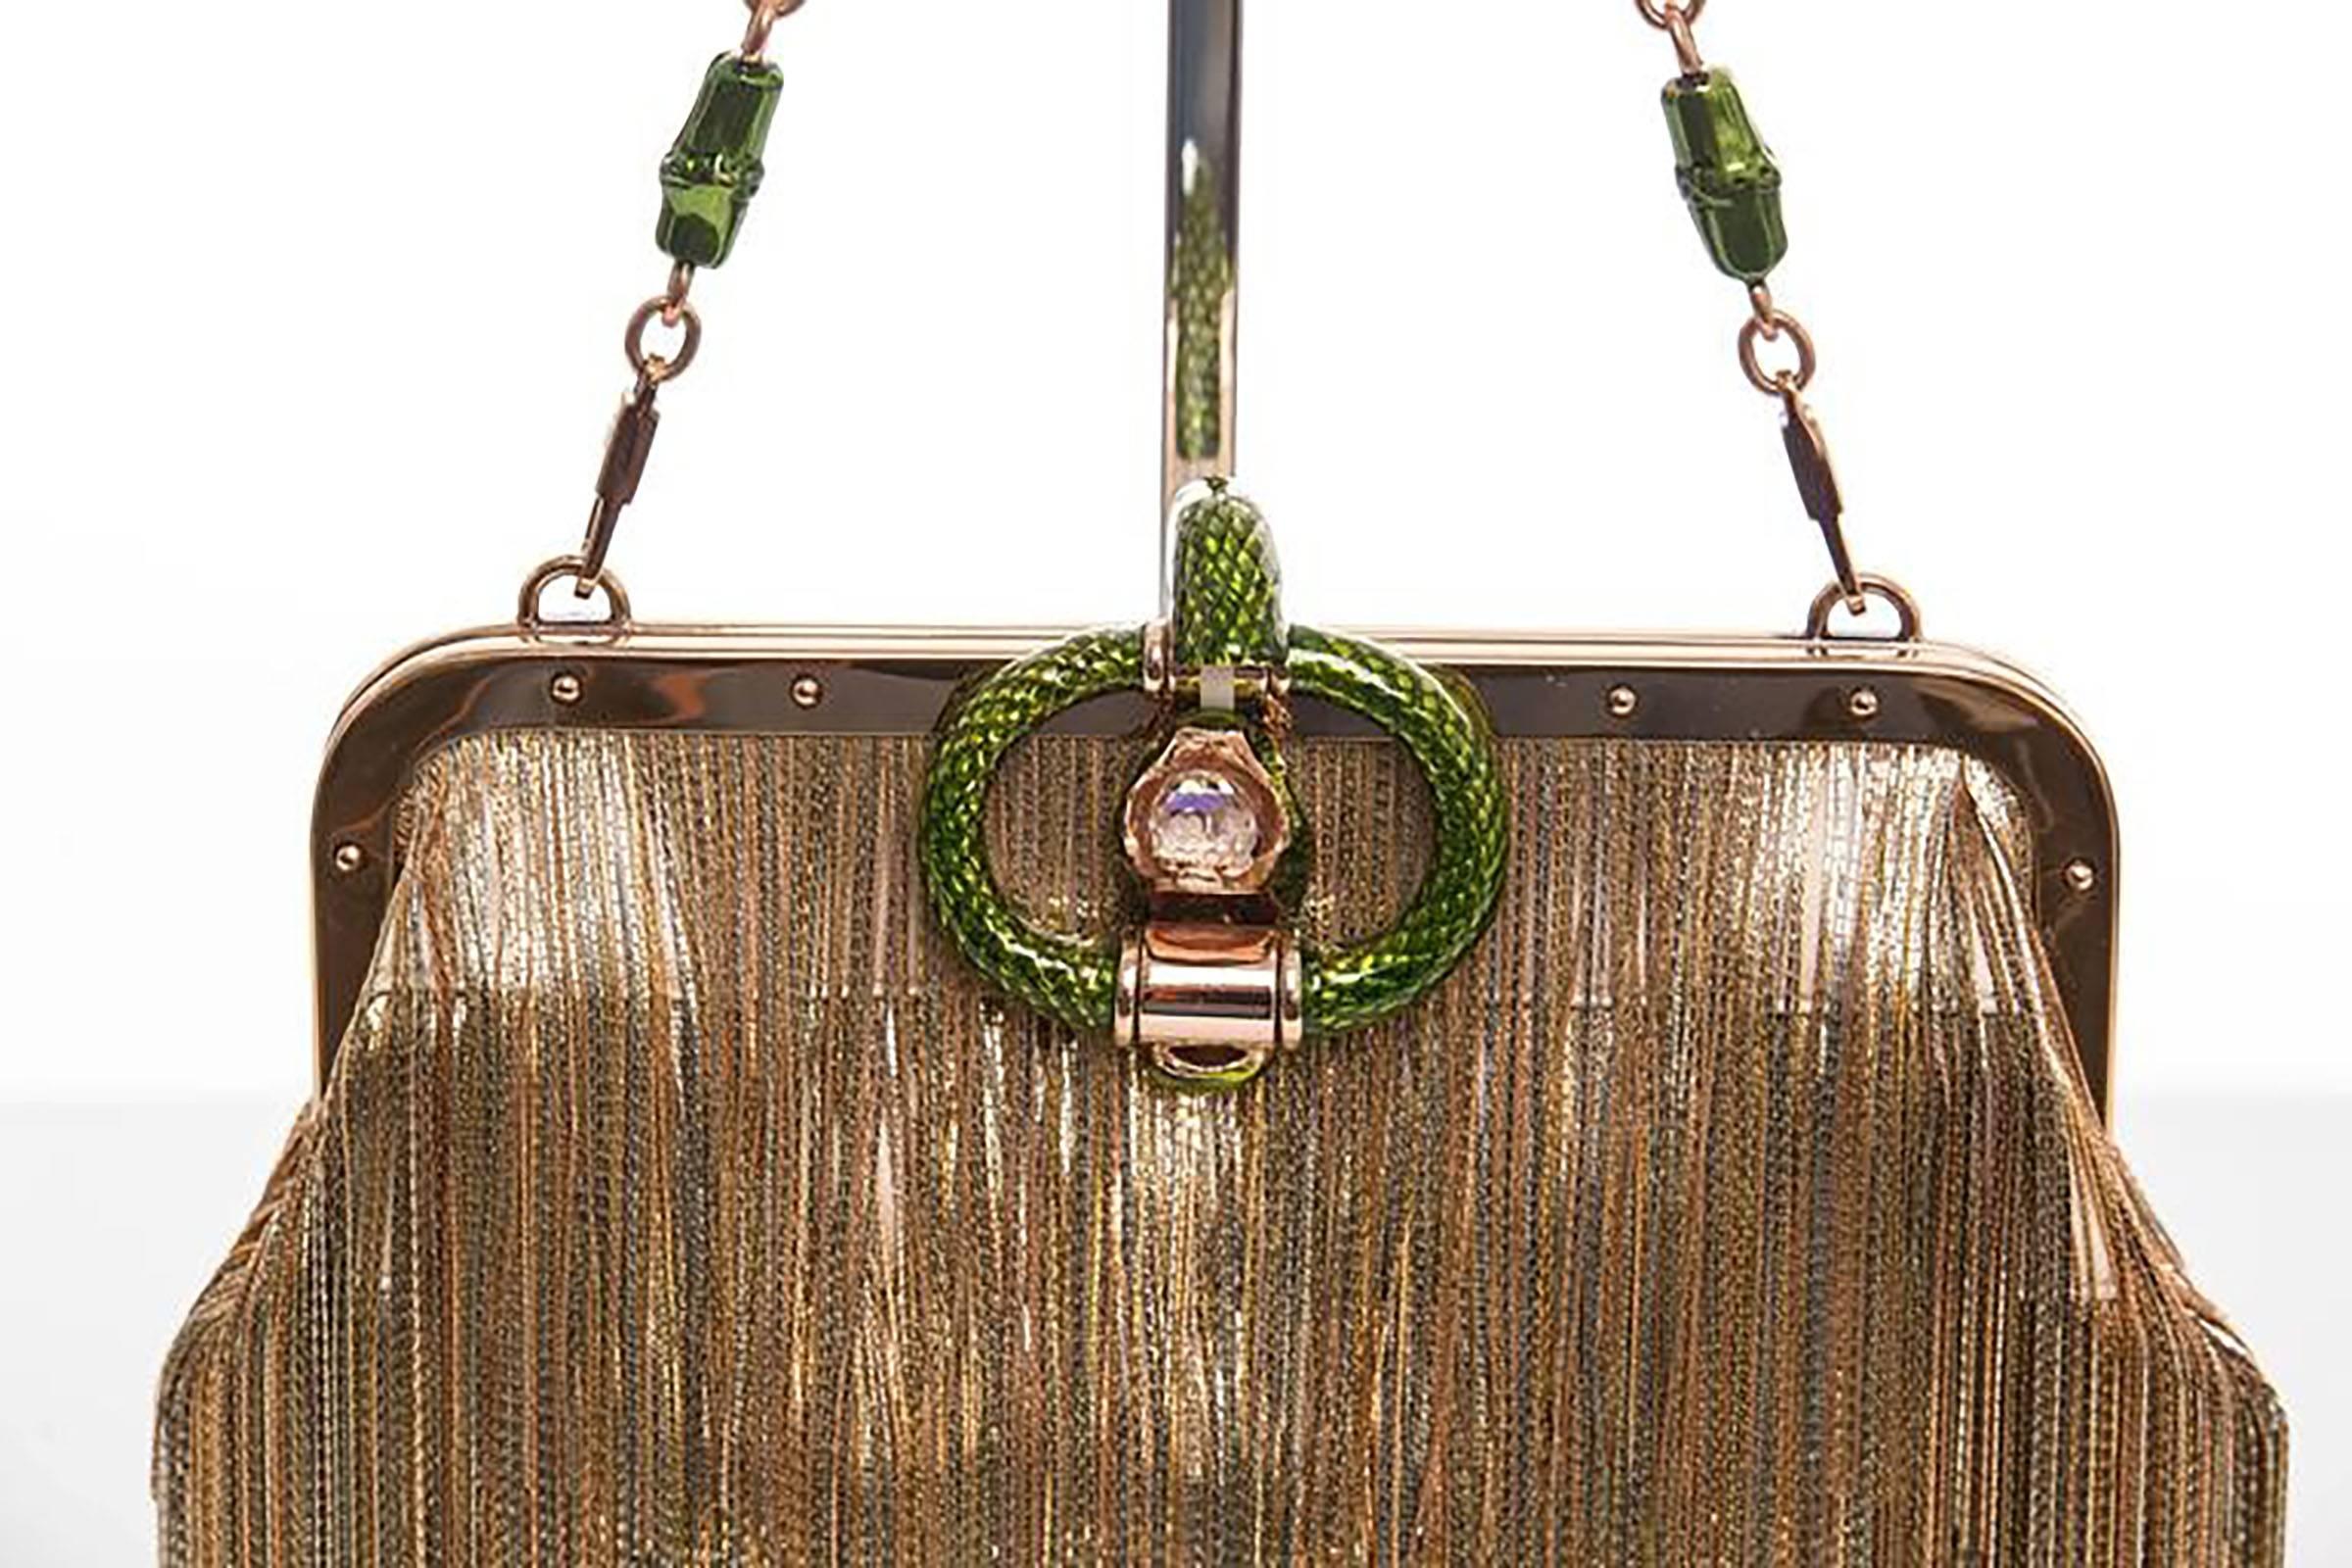 Women's Tom Ford for Gucci Limited Edition Fringe Dragon Clutch